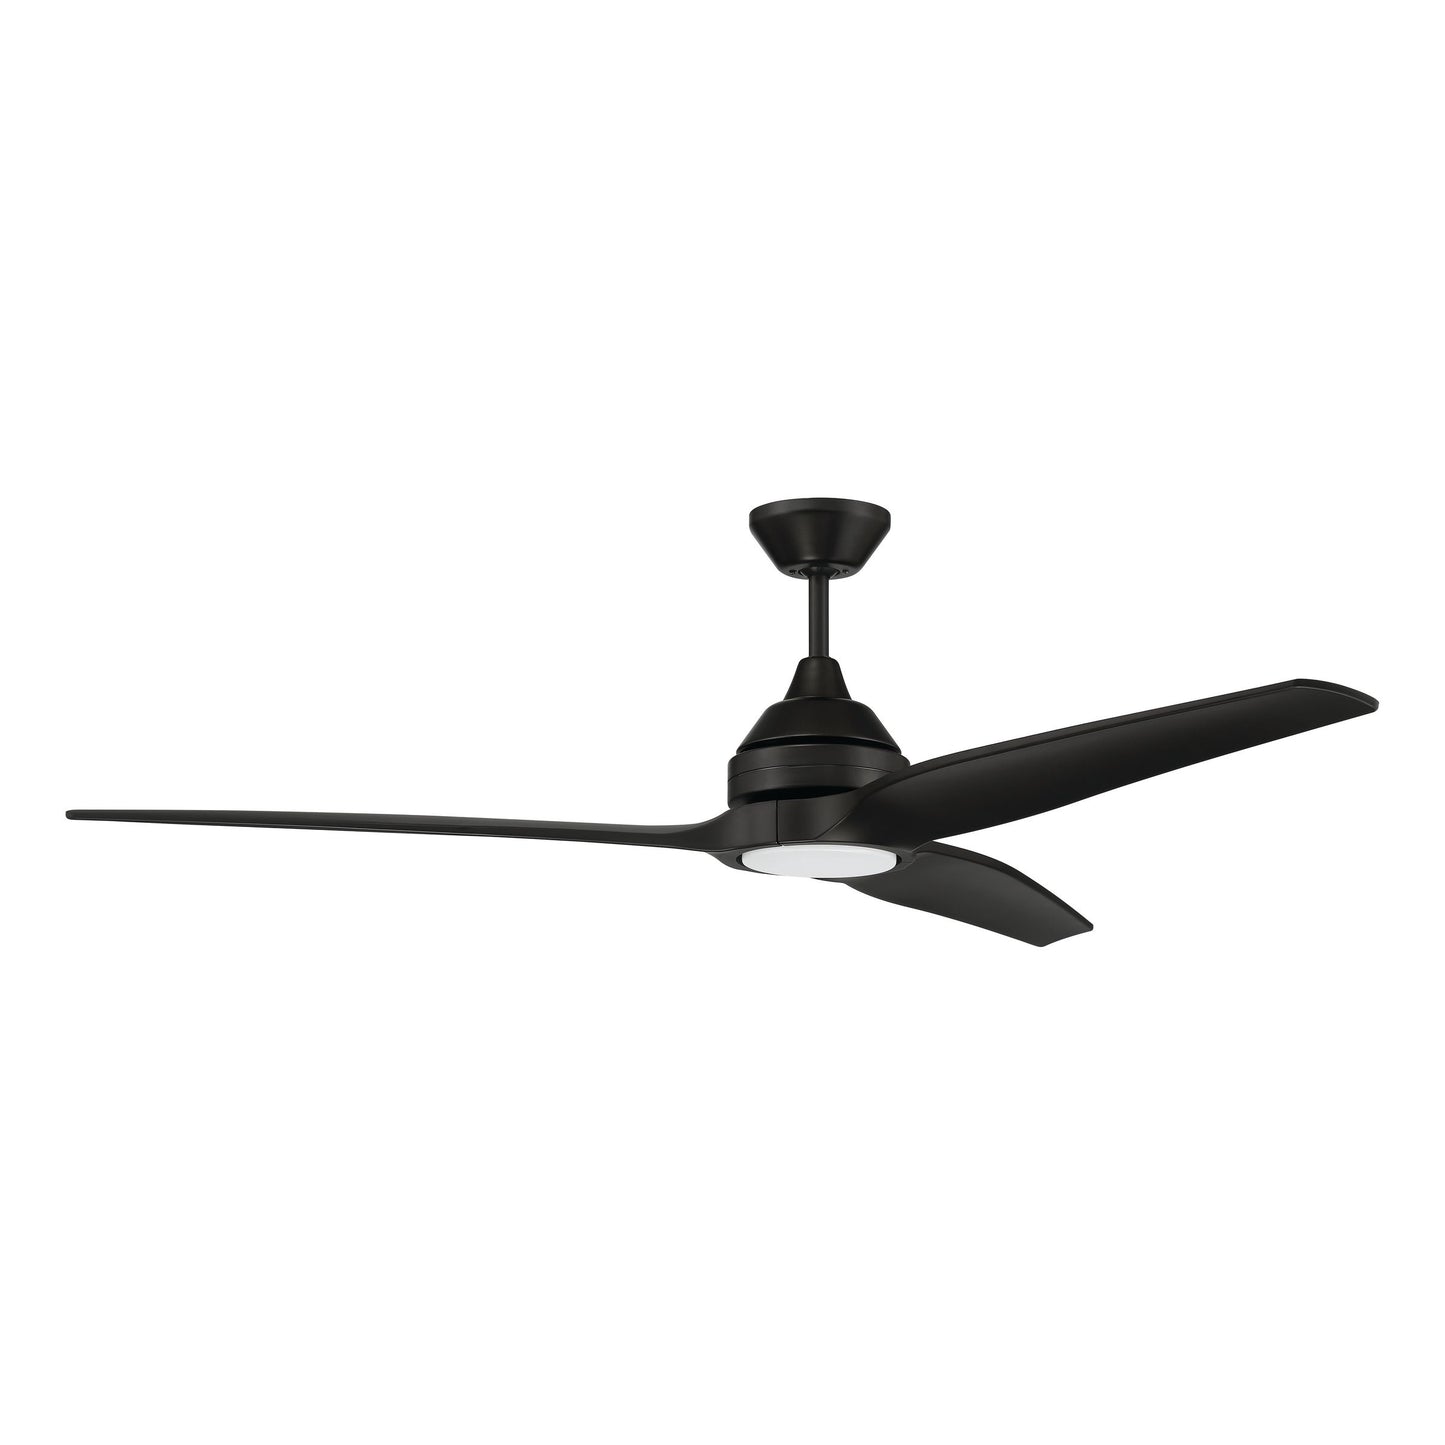 LIM60FB3 - Limerick 60" 3 Blade Indoor / Outdoor Ceiling Fan with Light Kit - Remote & Wall Control